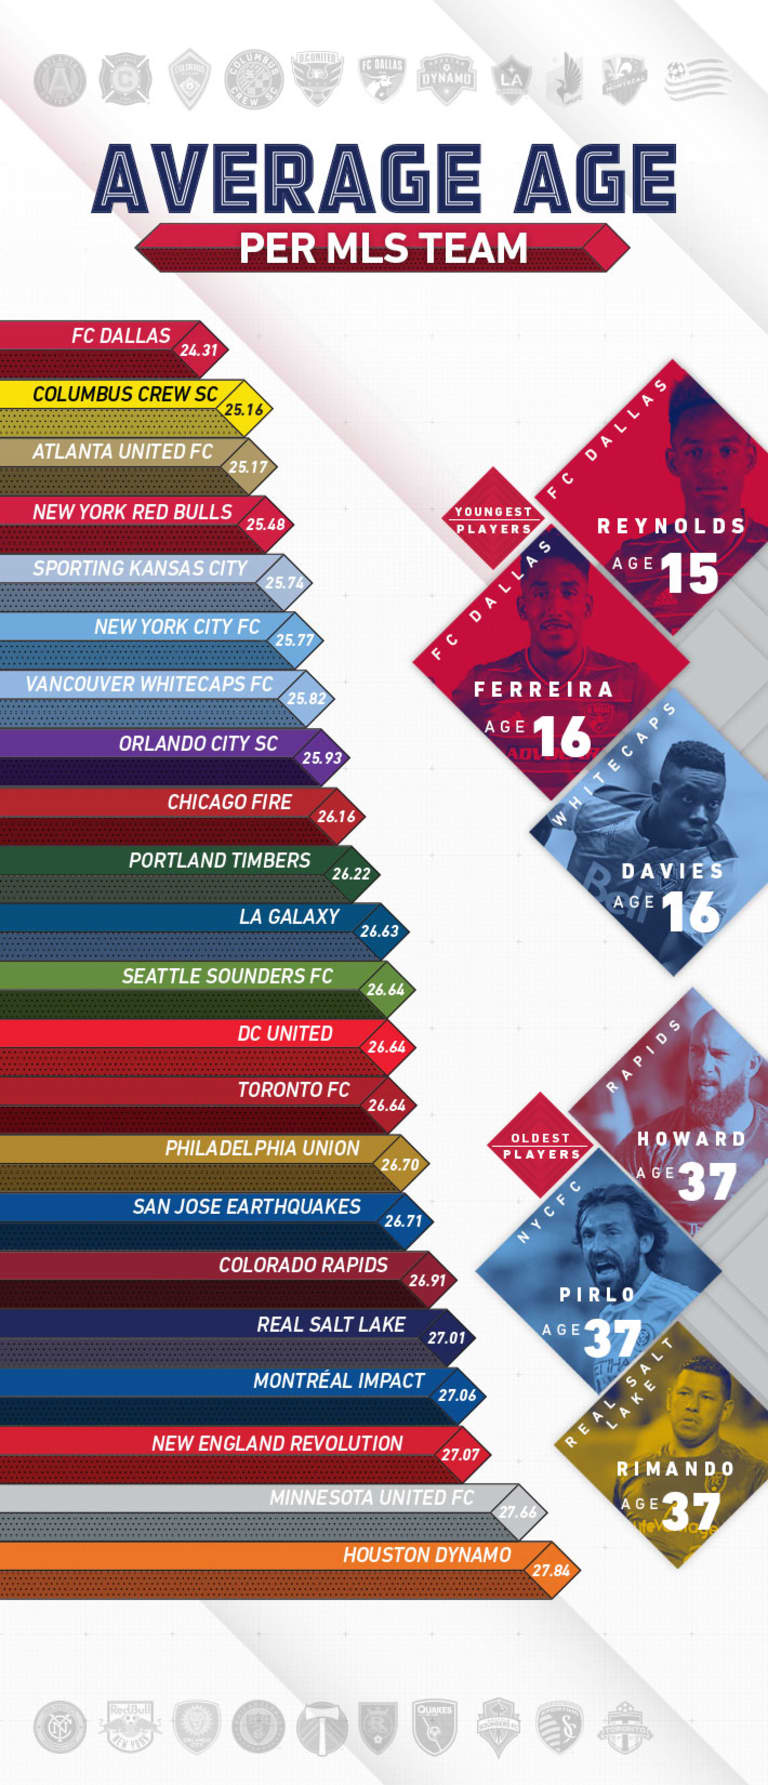 Just a number? Check out this infographic breaking down the average age of each MLS team -